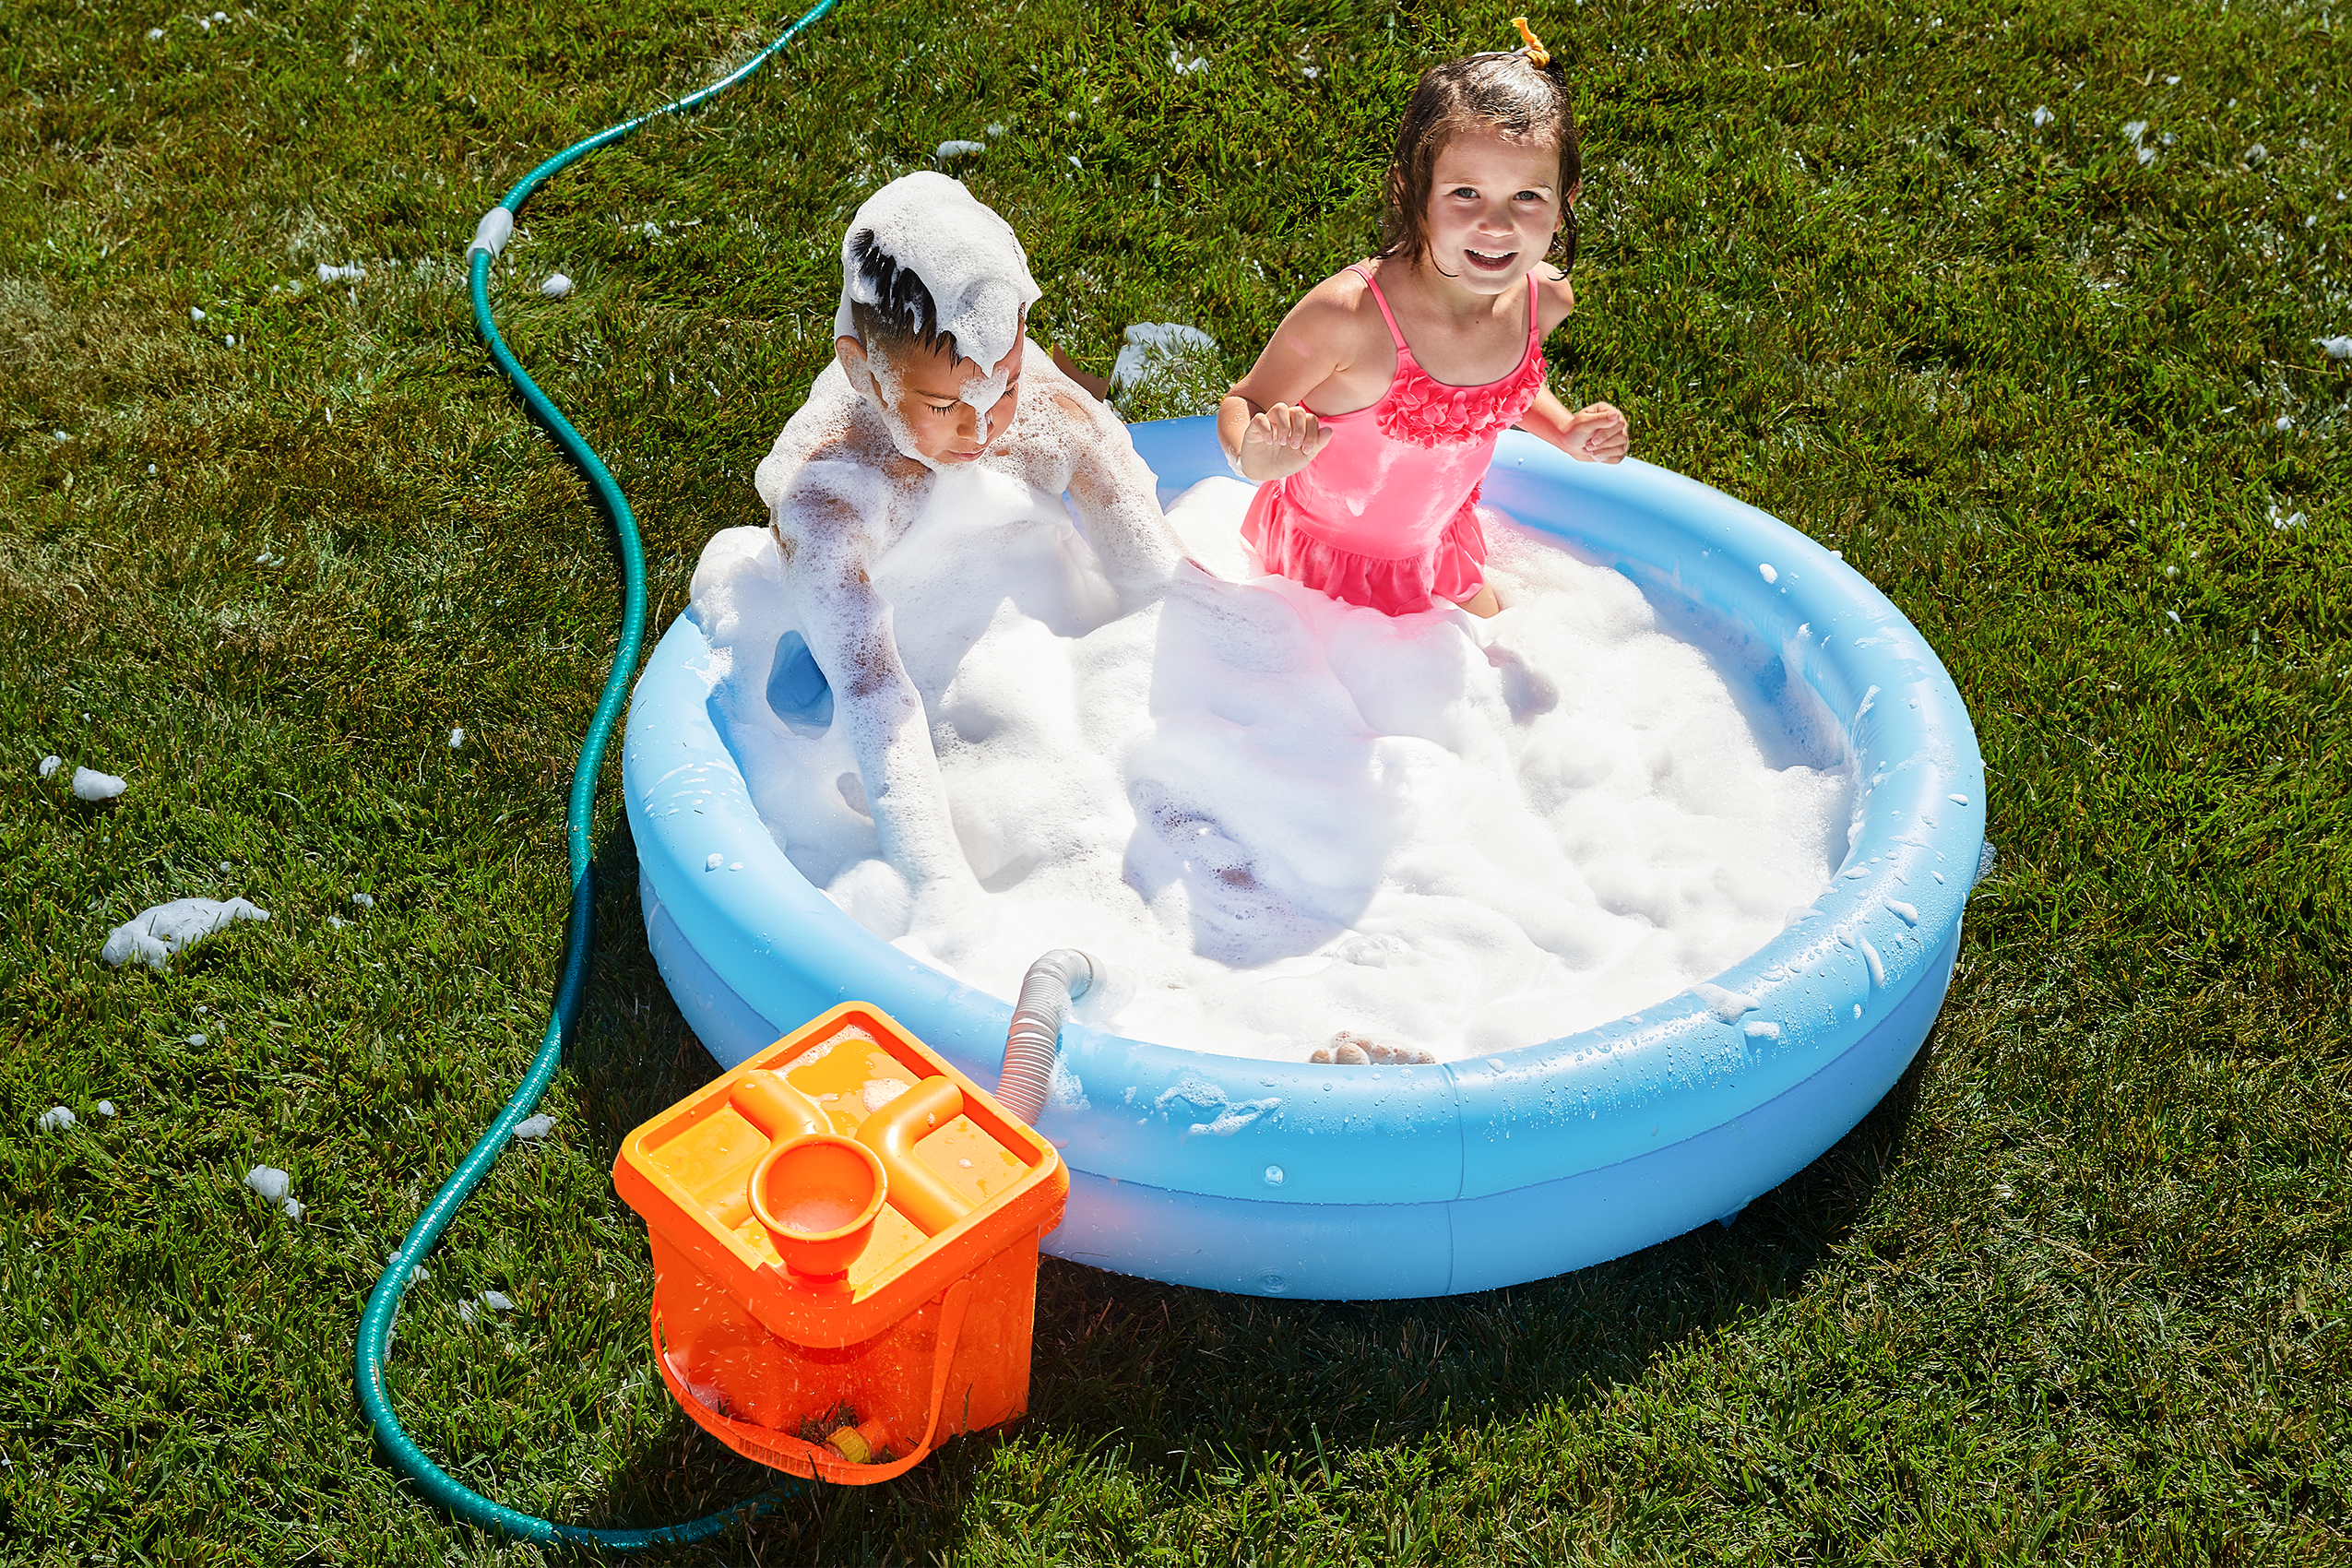 Children are playing with Foam Party™ Bucket With Kiddie Pool in backyard